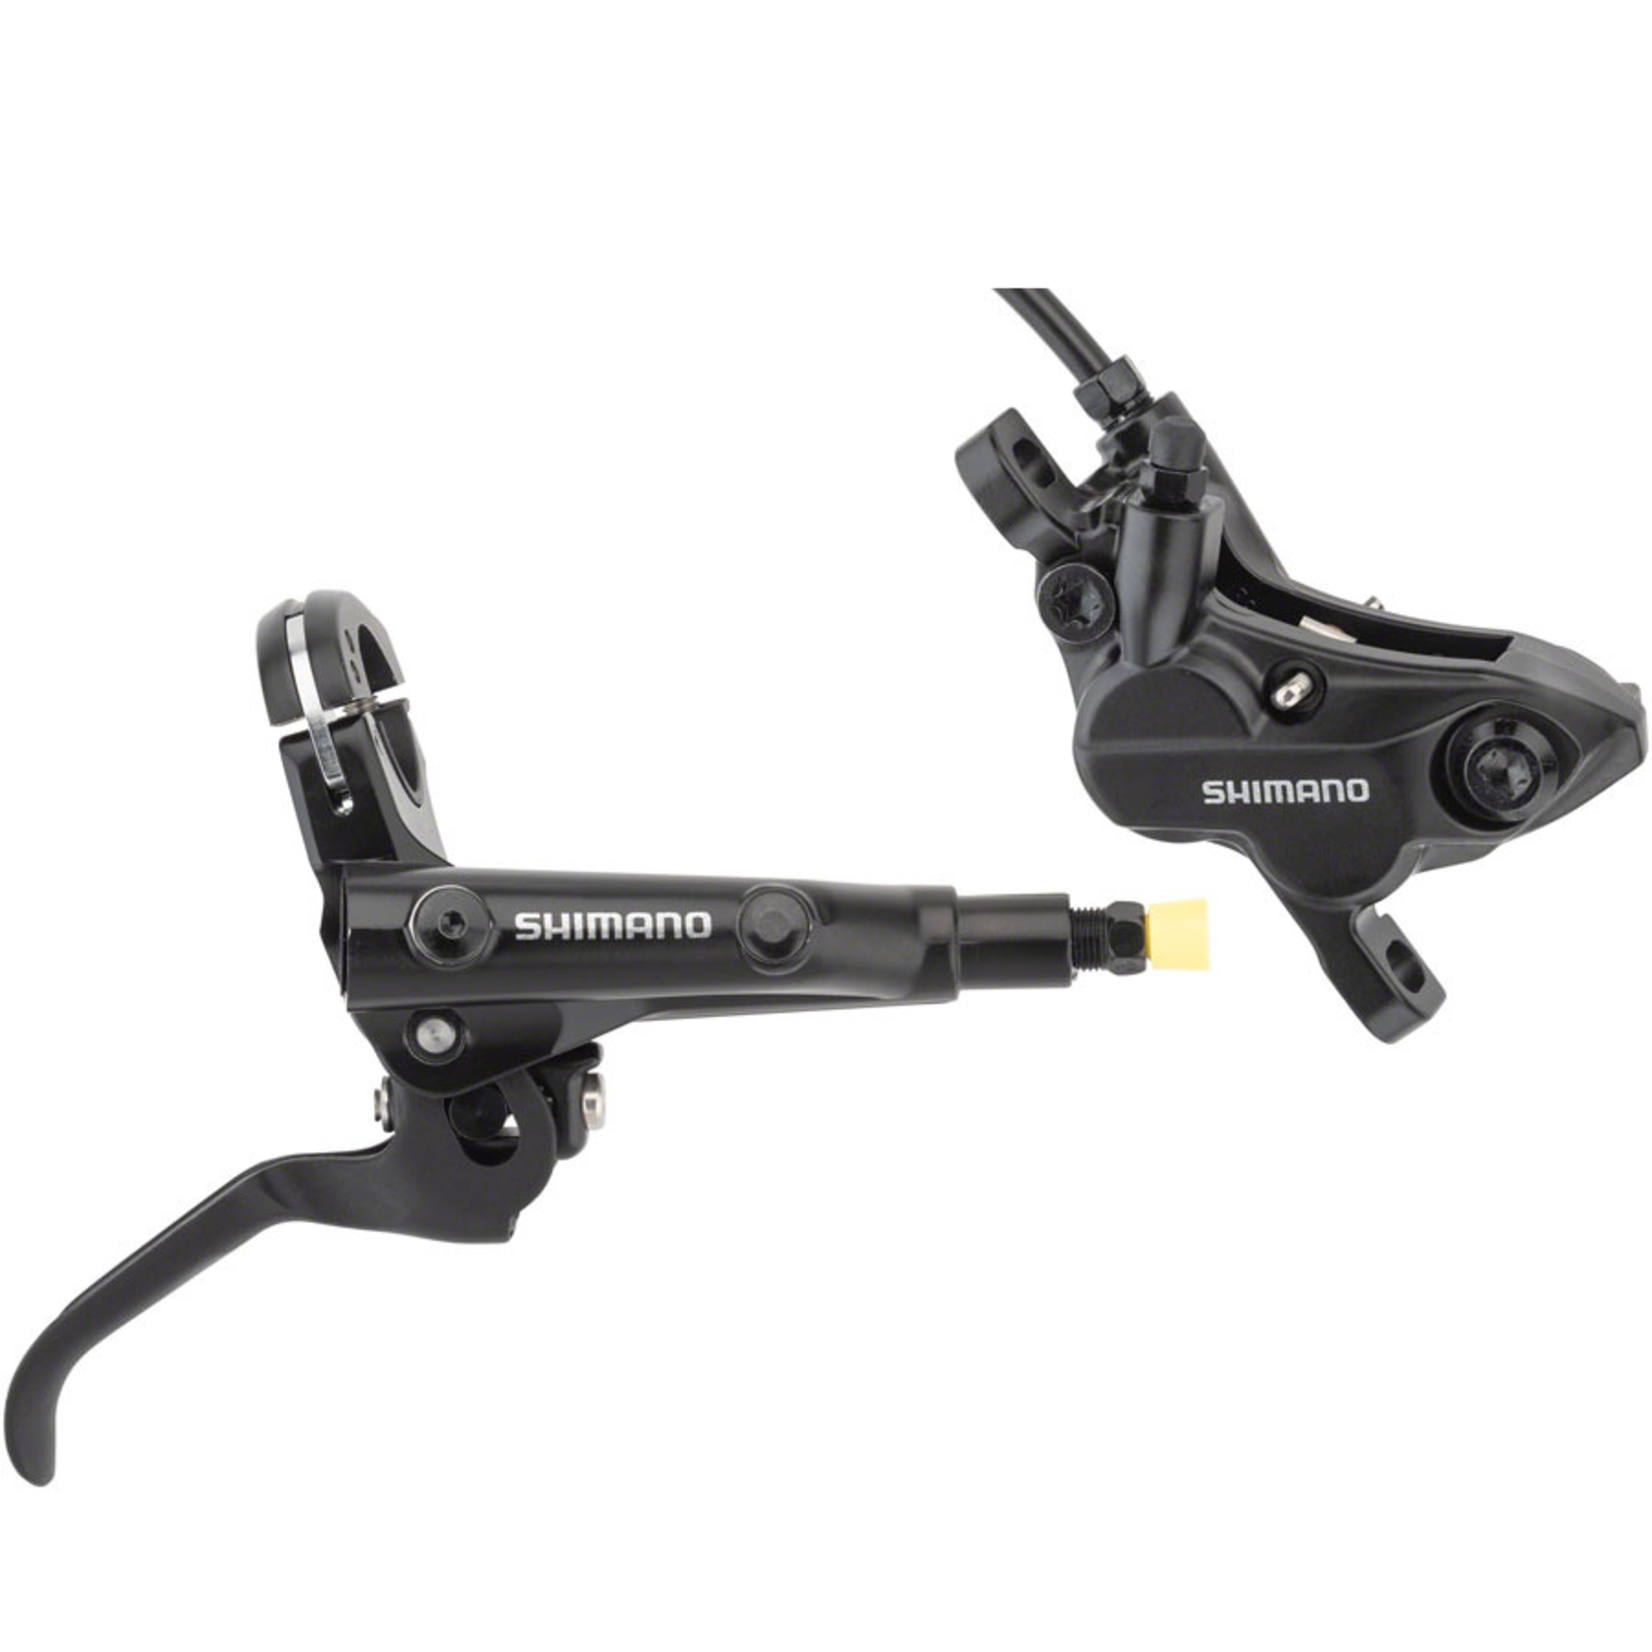 Shimano Shimano Deore BL-MT501/BR-MT520 Disc Brake and Lever - Rear Hydraulic Post Mount Black